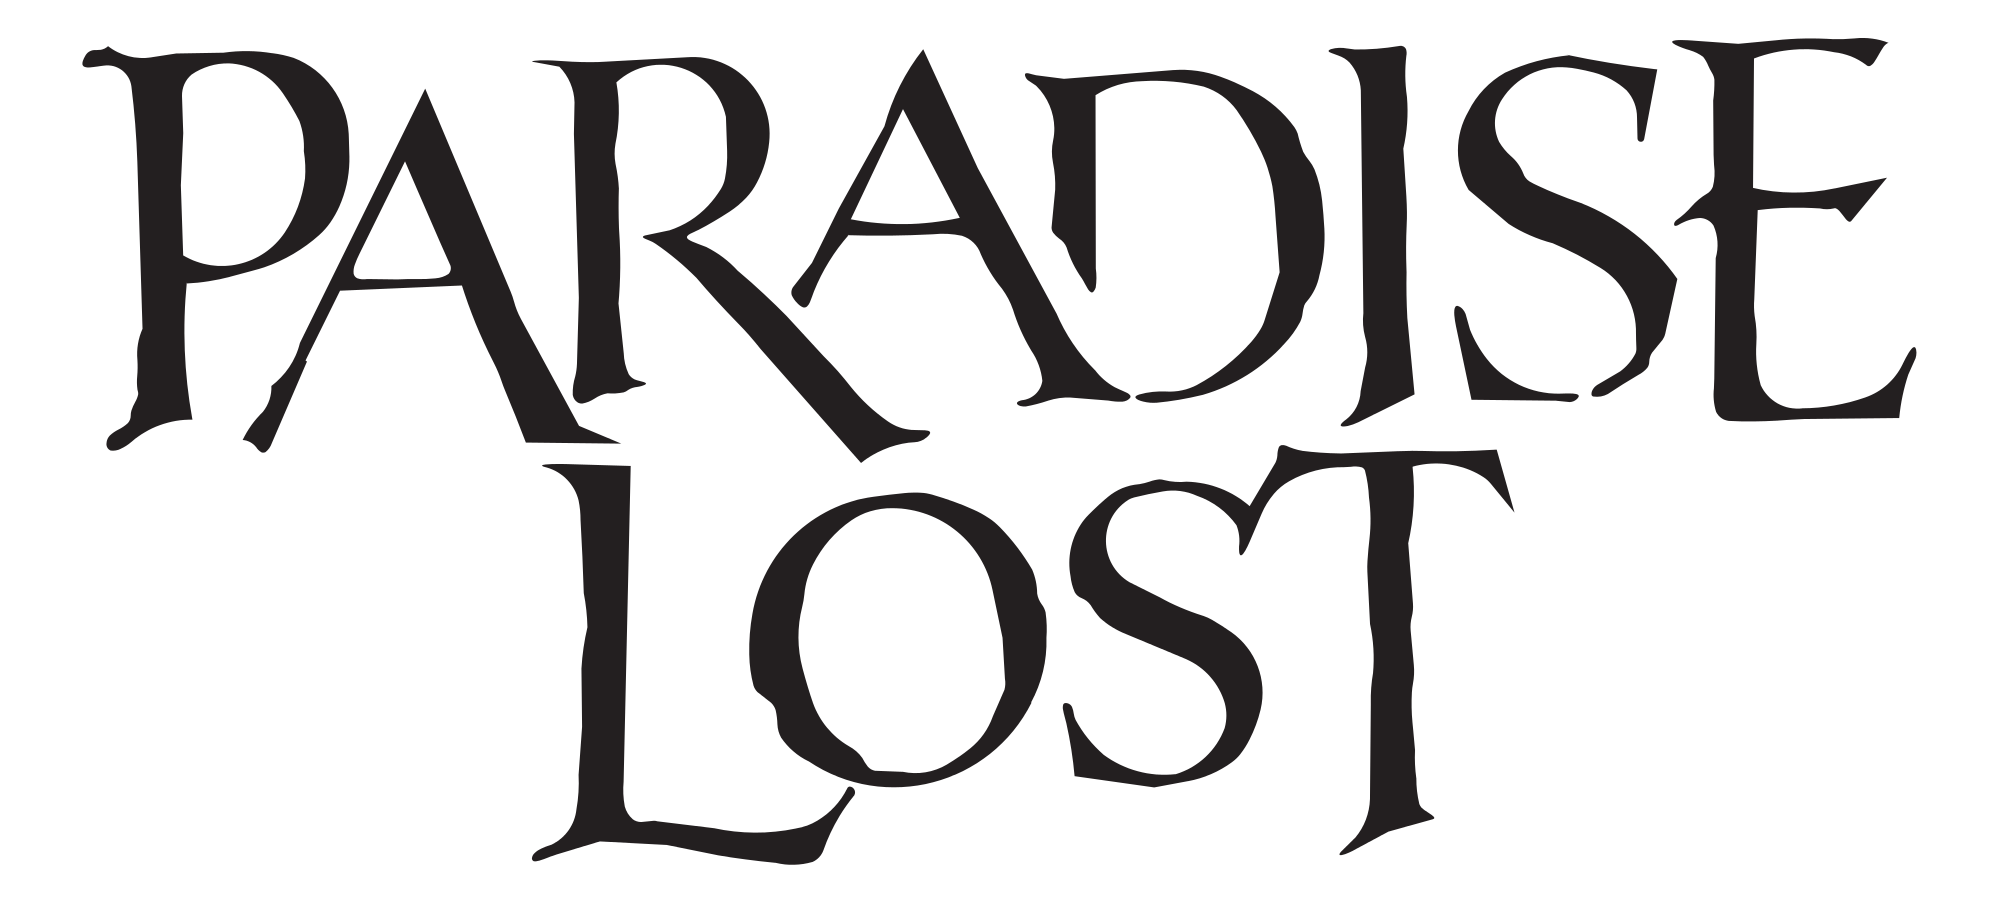 Lost Logo - File:Paradise-lost-logo.svg - Wikimedia Commons